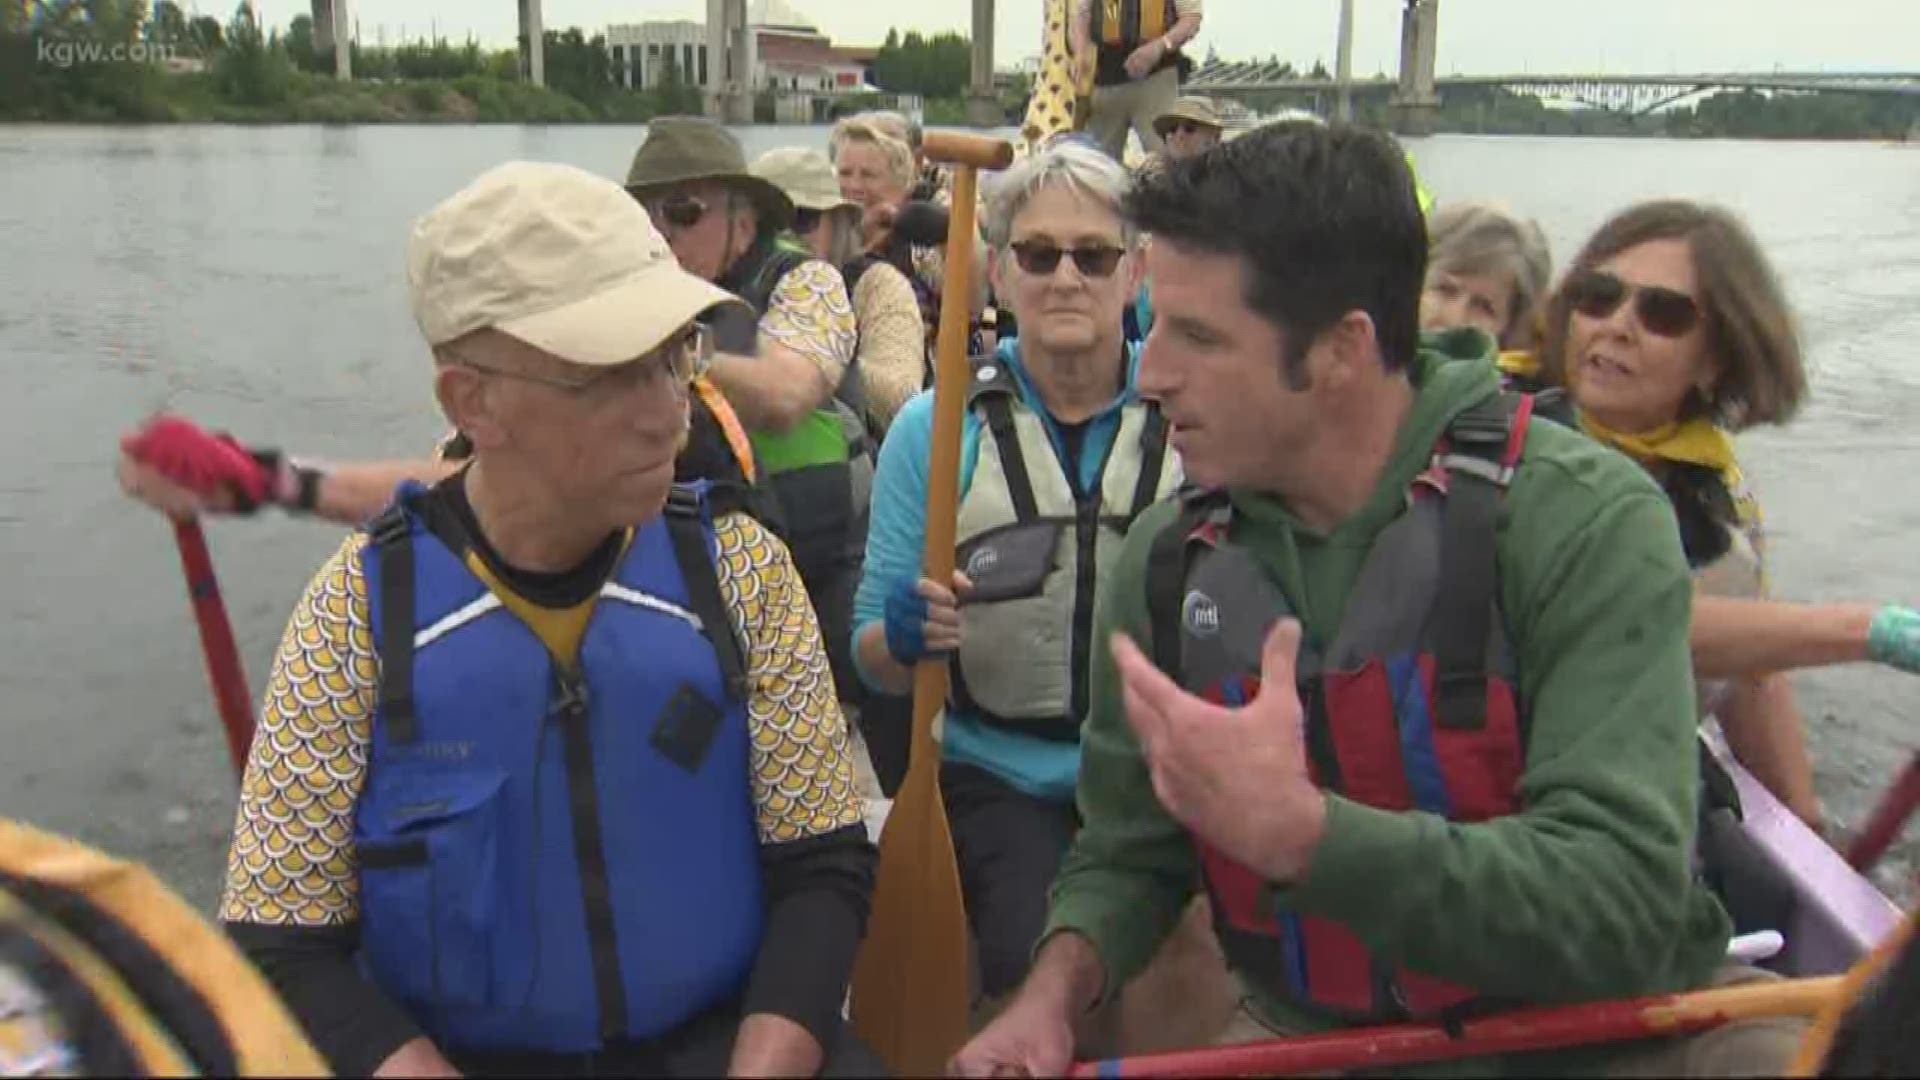 The Golden Dragons have been around two decades. The paddlers average 70-years-old but they'll take on all ages. They will join paddlers in the Rose Festival Dragon Boat races.